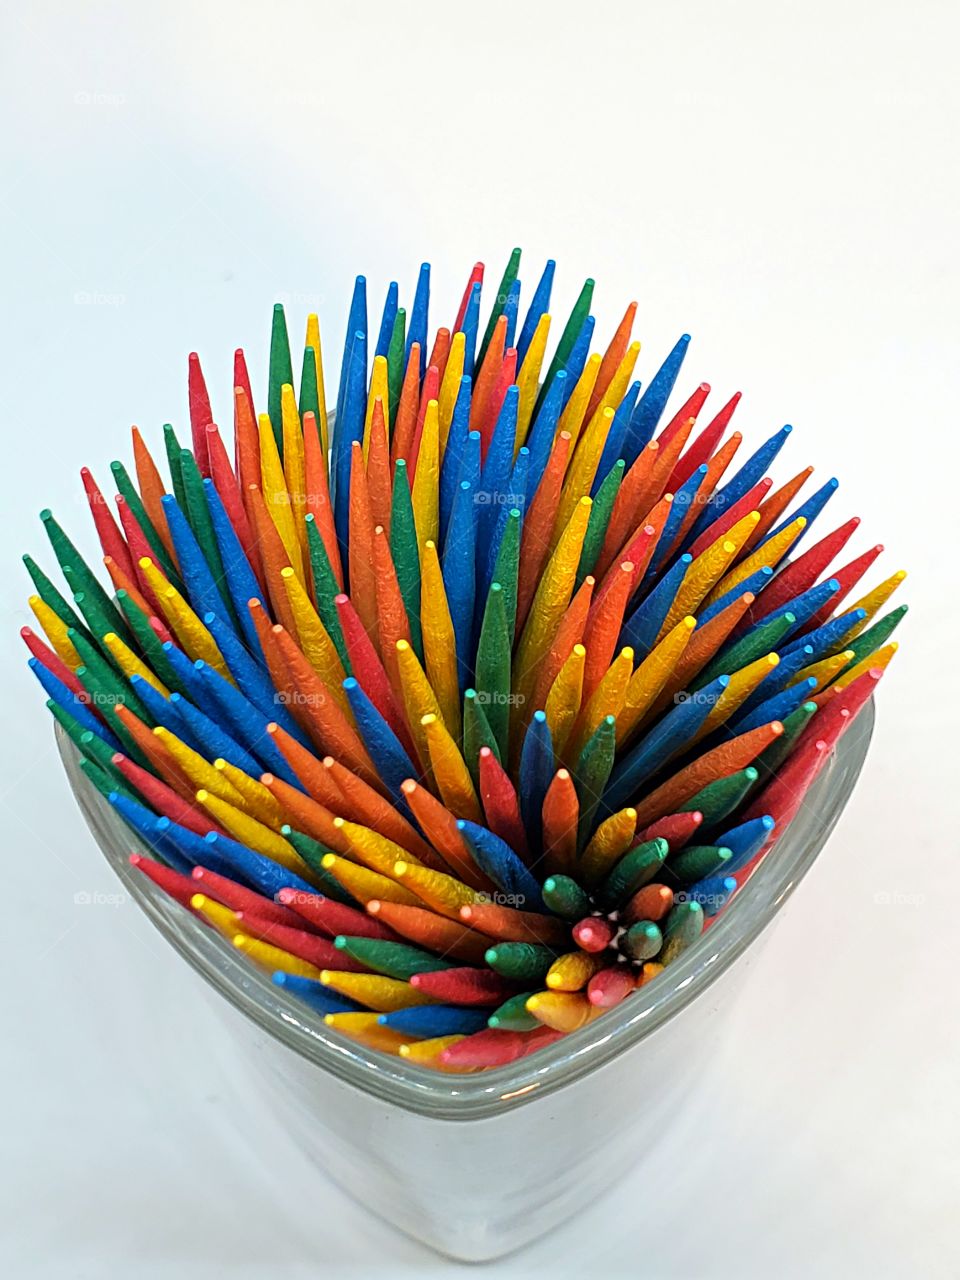 A simple container of colored toothpicks that caught my eye!